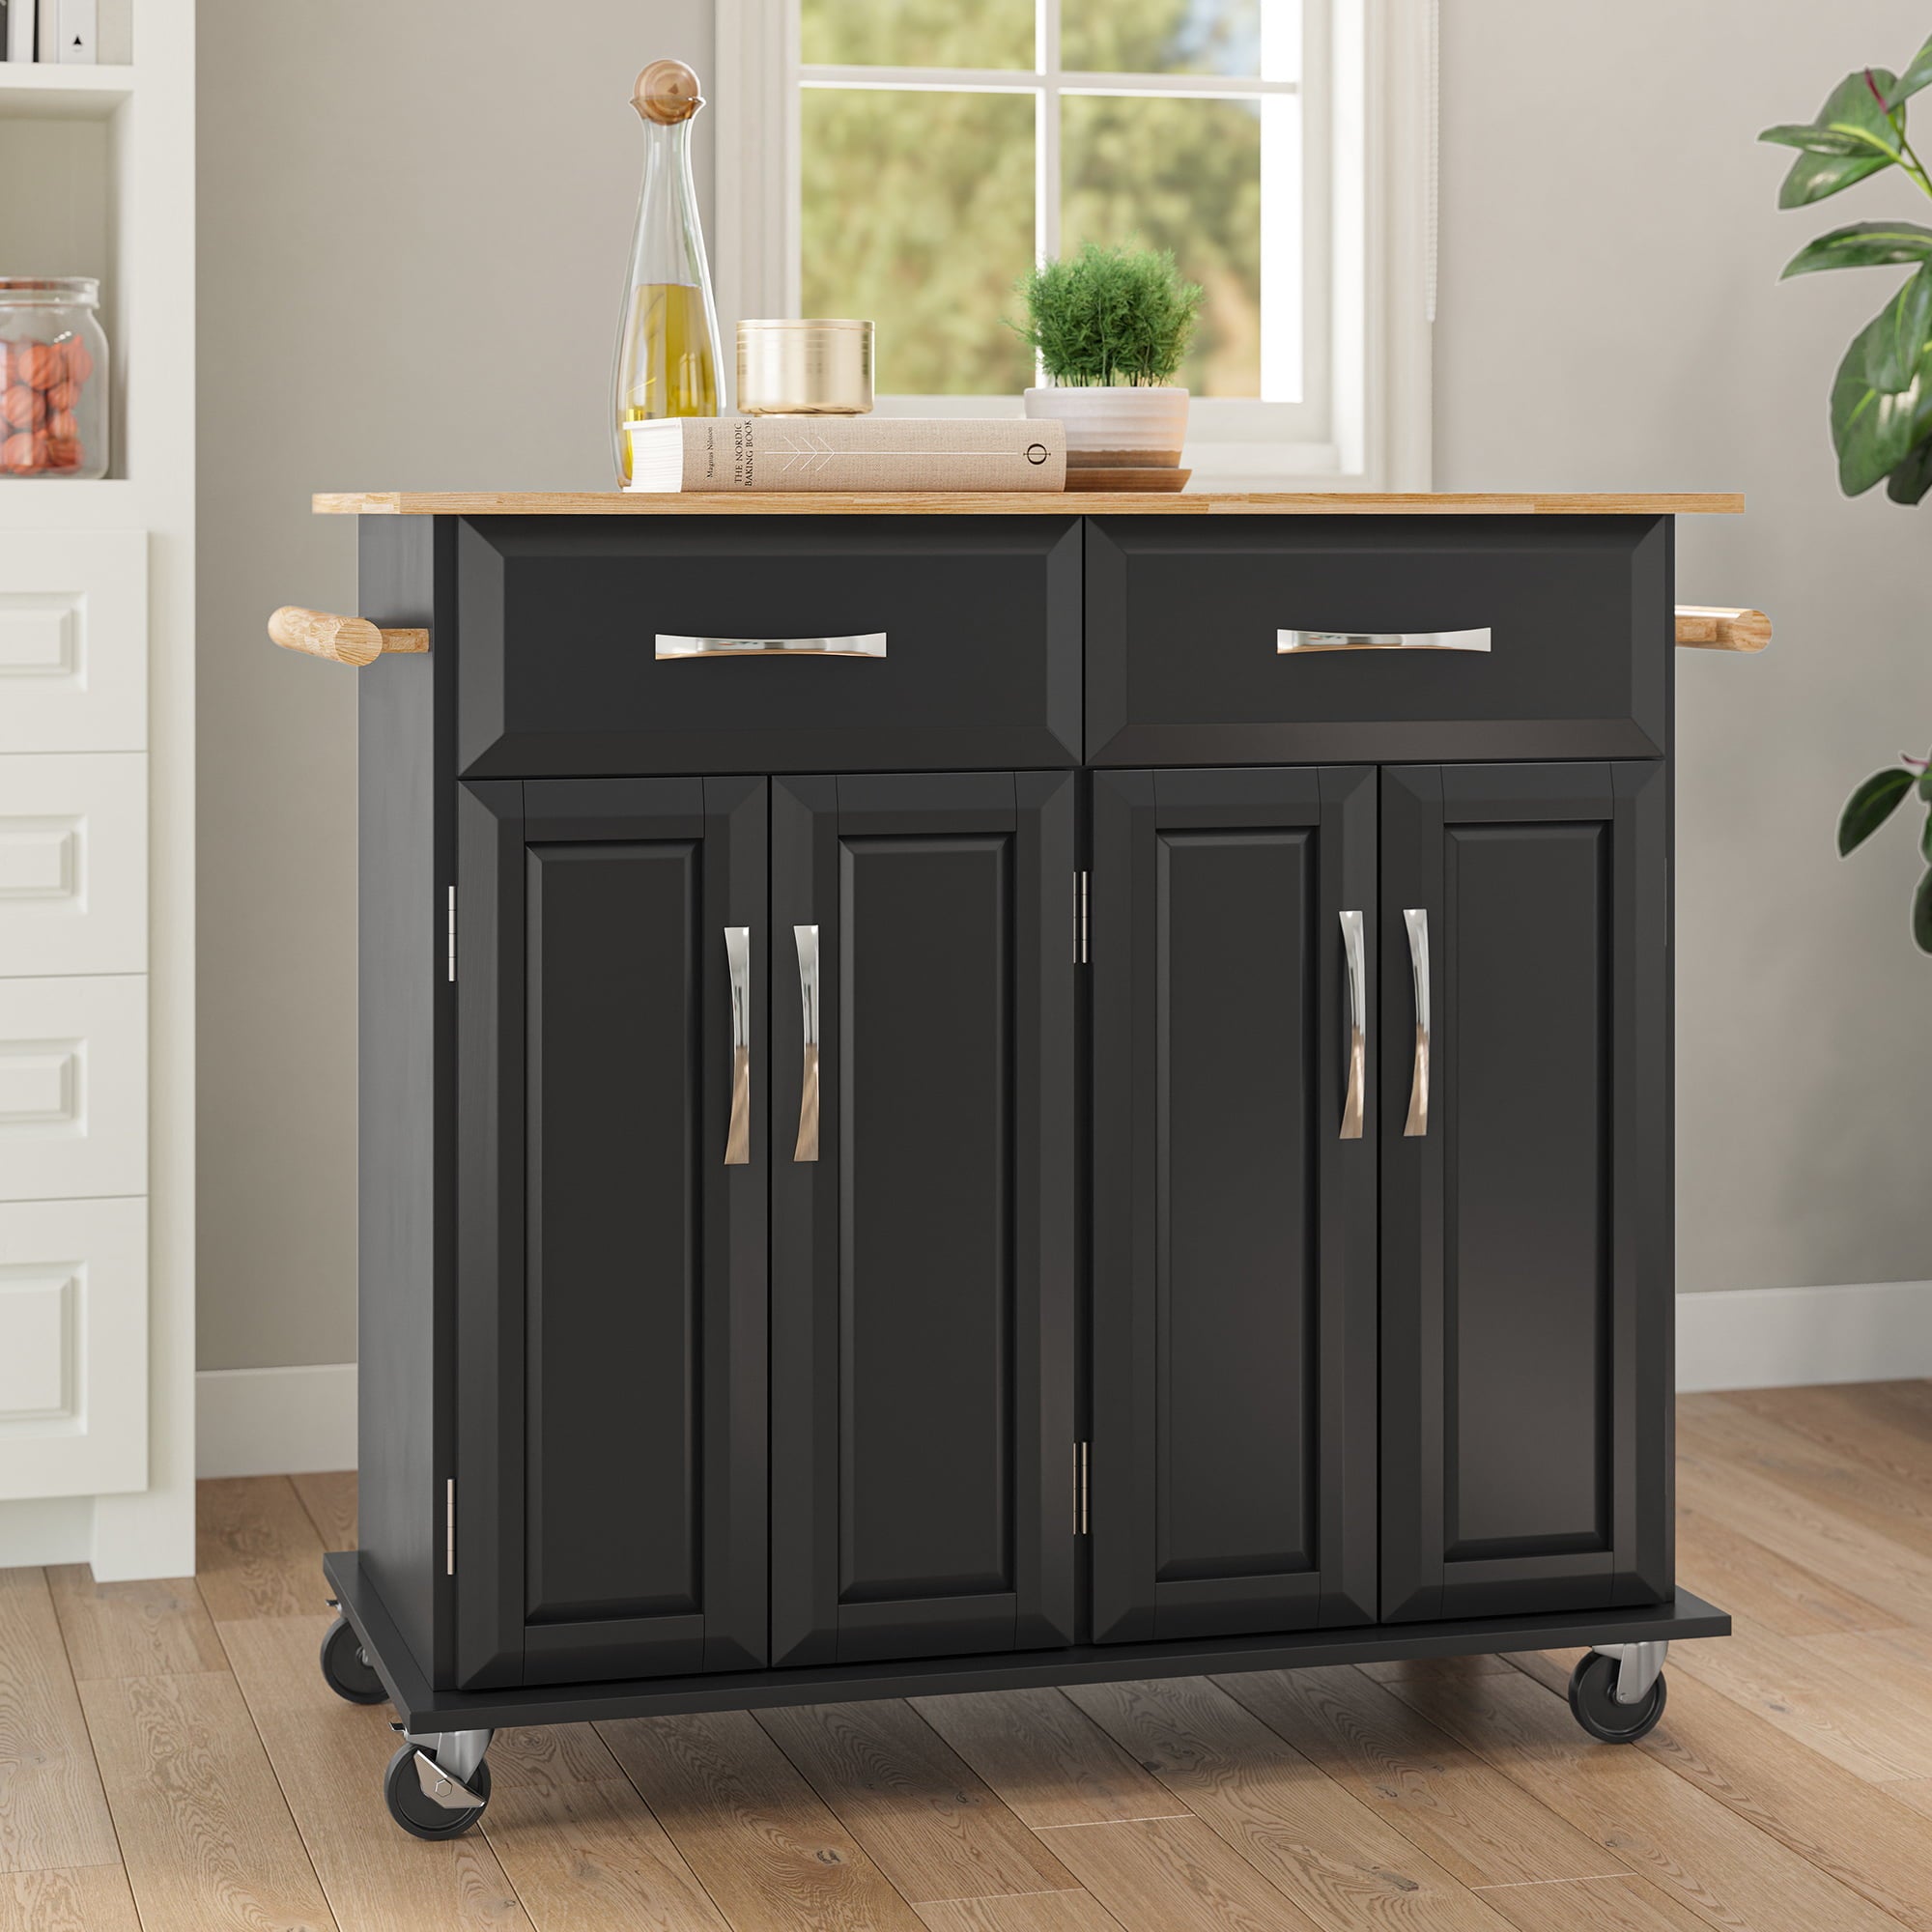 BELLEZE Rolling Kitchen Island Utility Cart with 2 Drawers - Baldy (Black)